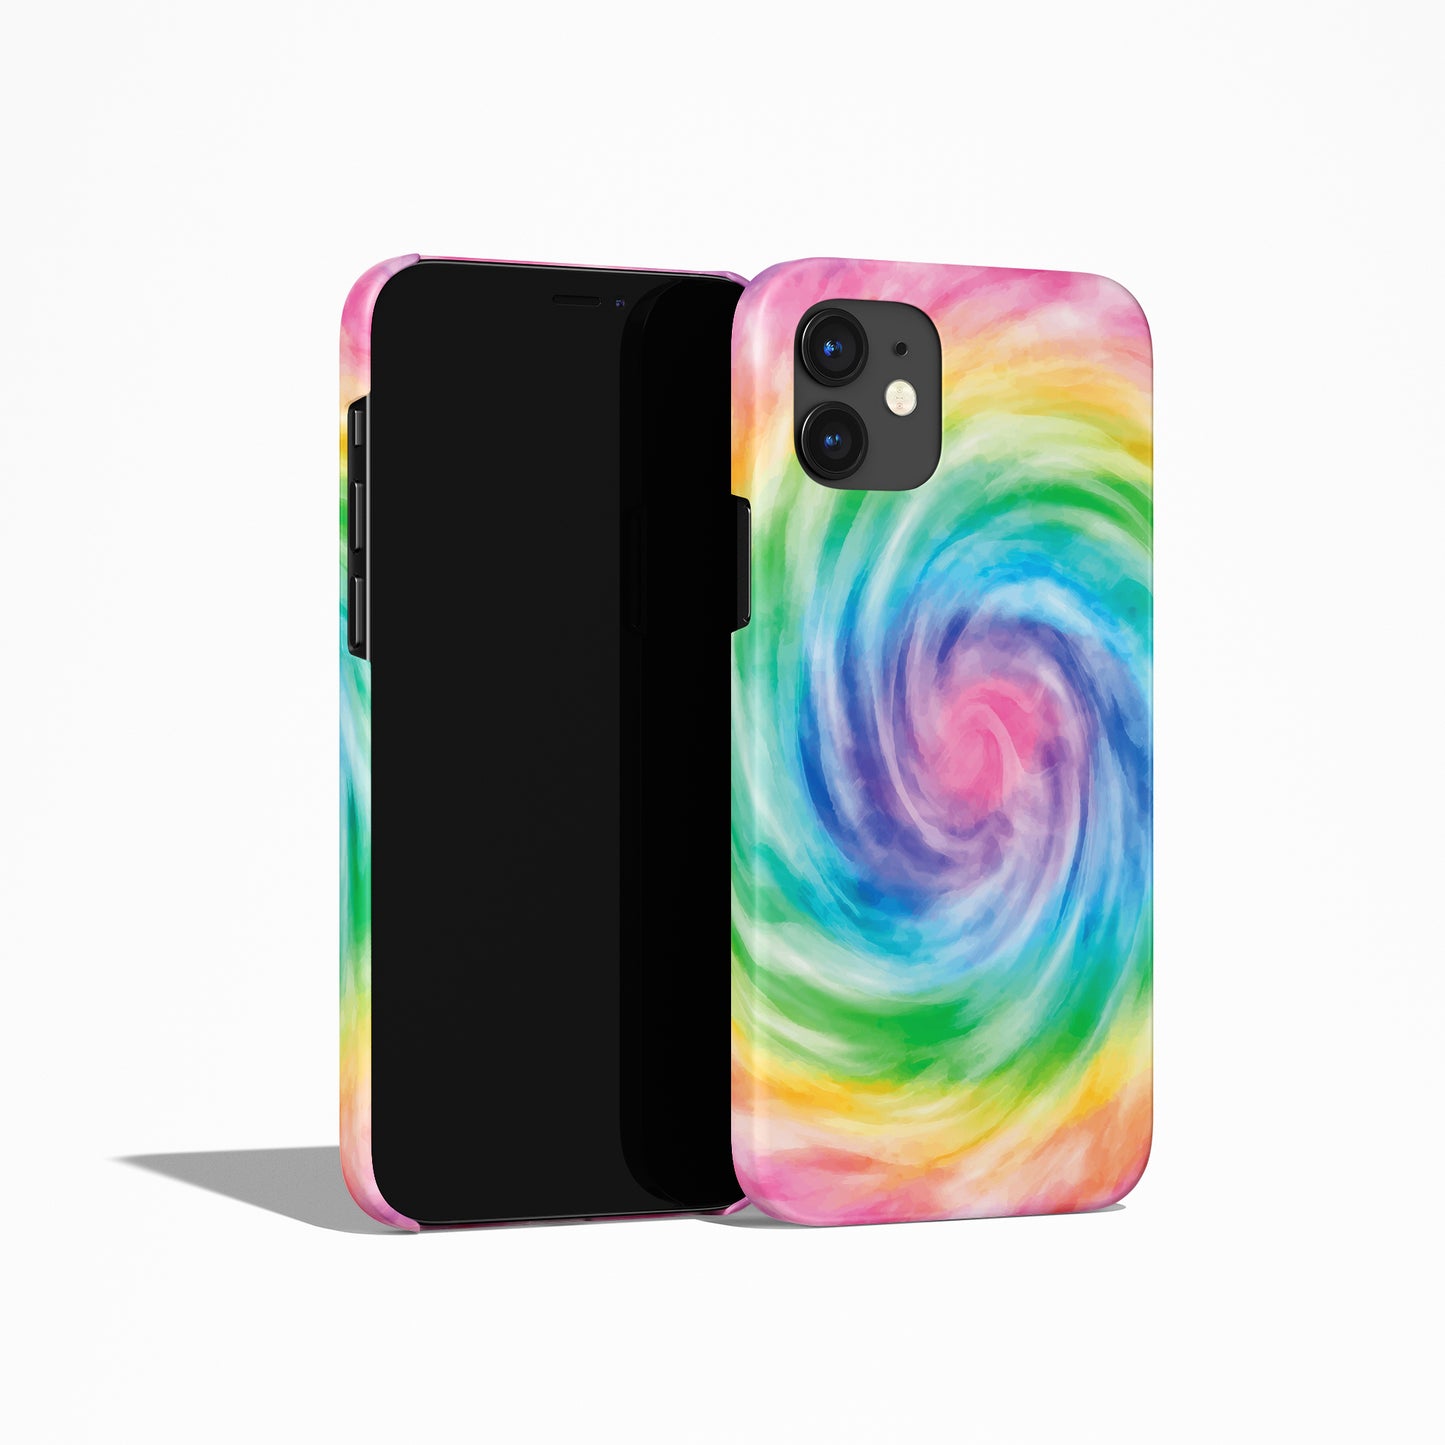 Colorful Tie Dye 60s 70s iPhone Case